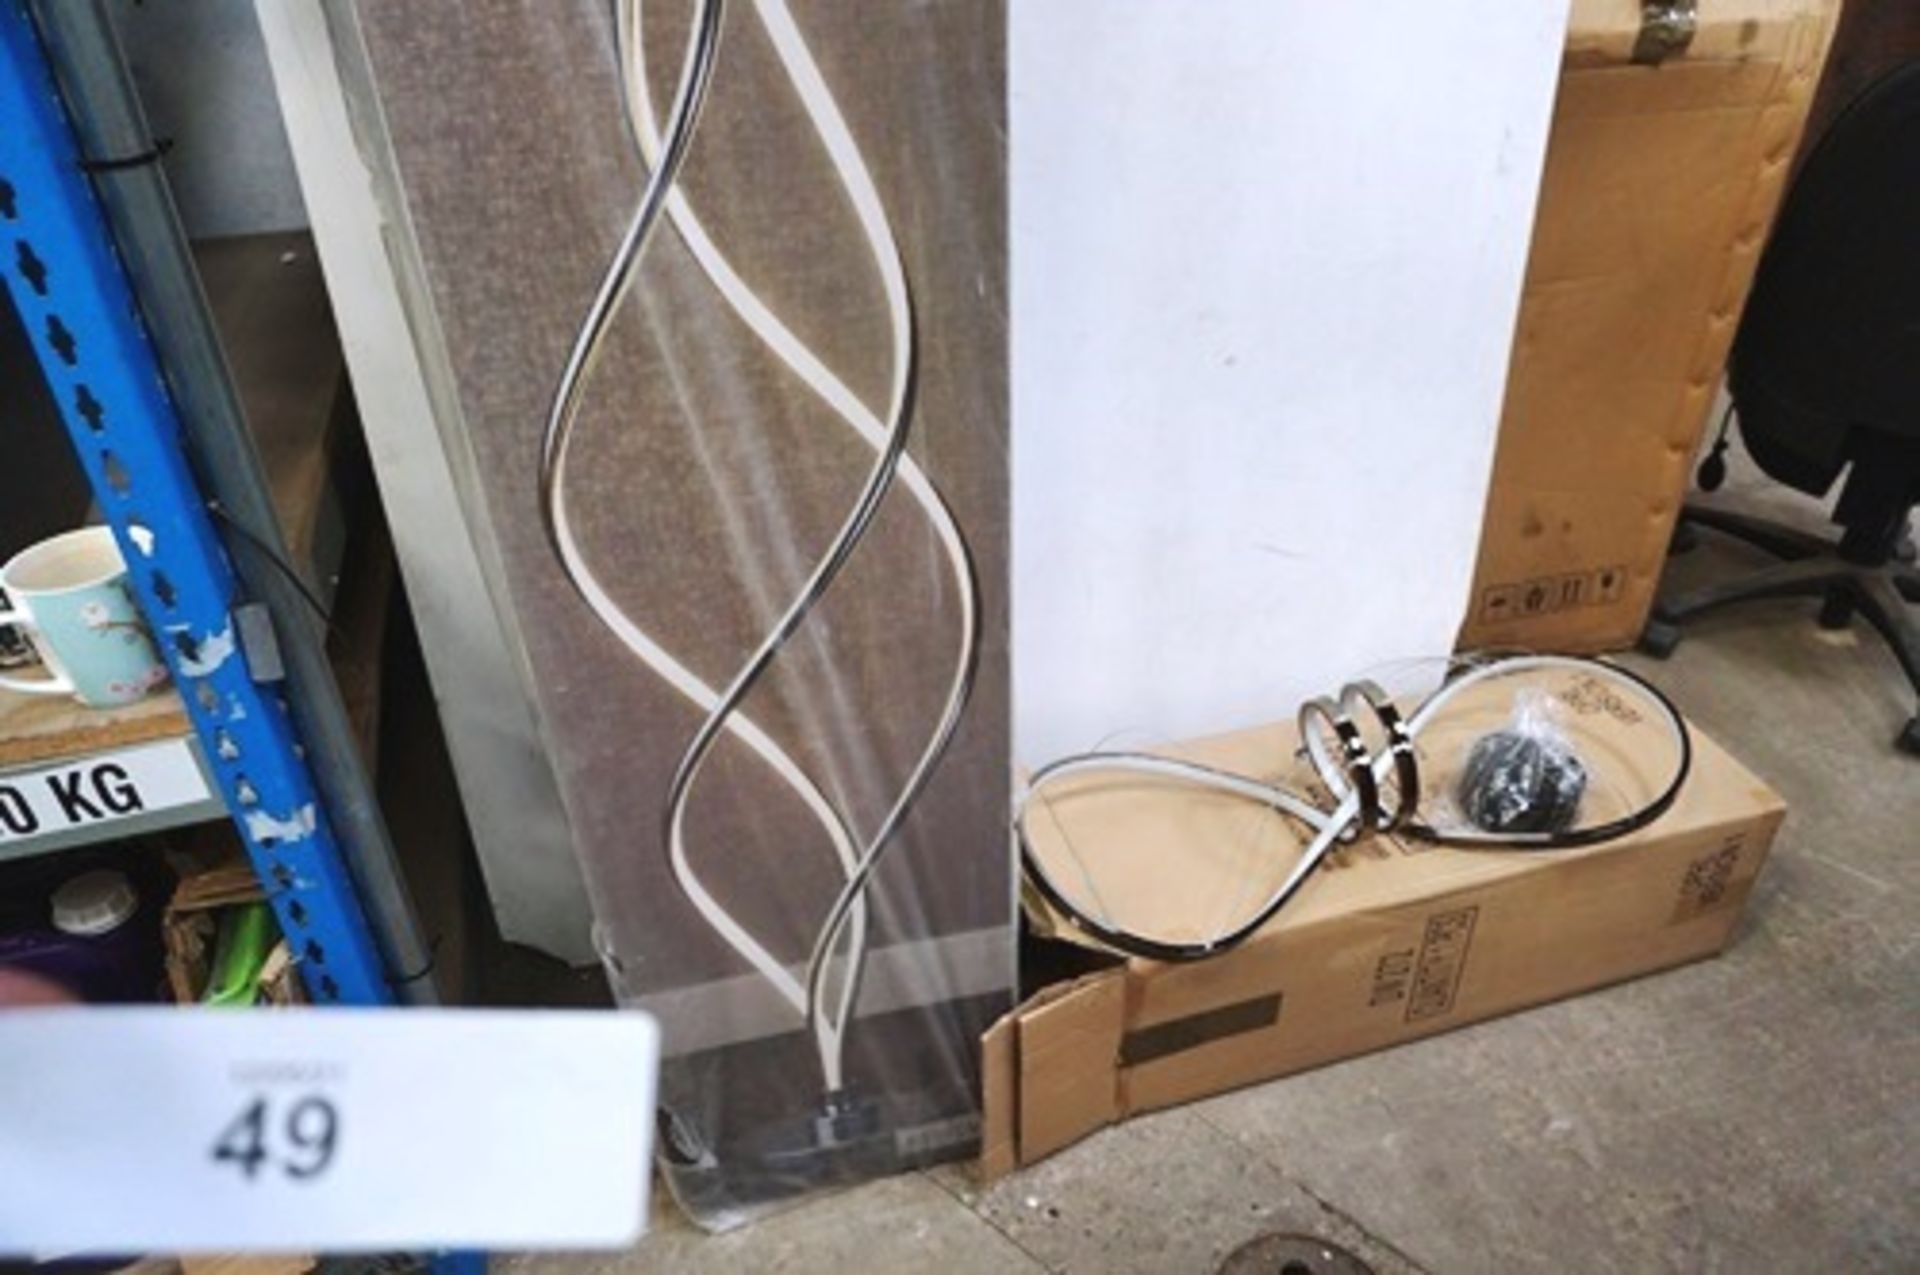 1 x chrome entwined LED floor lamp, SKU: 223505, new in box together with 1 x Dunelm twisted LED